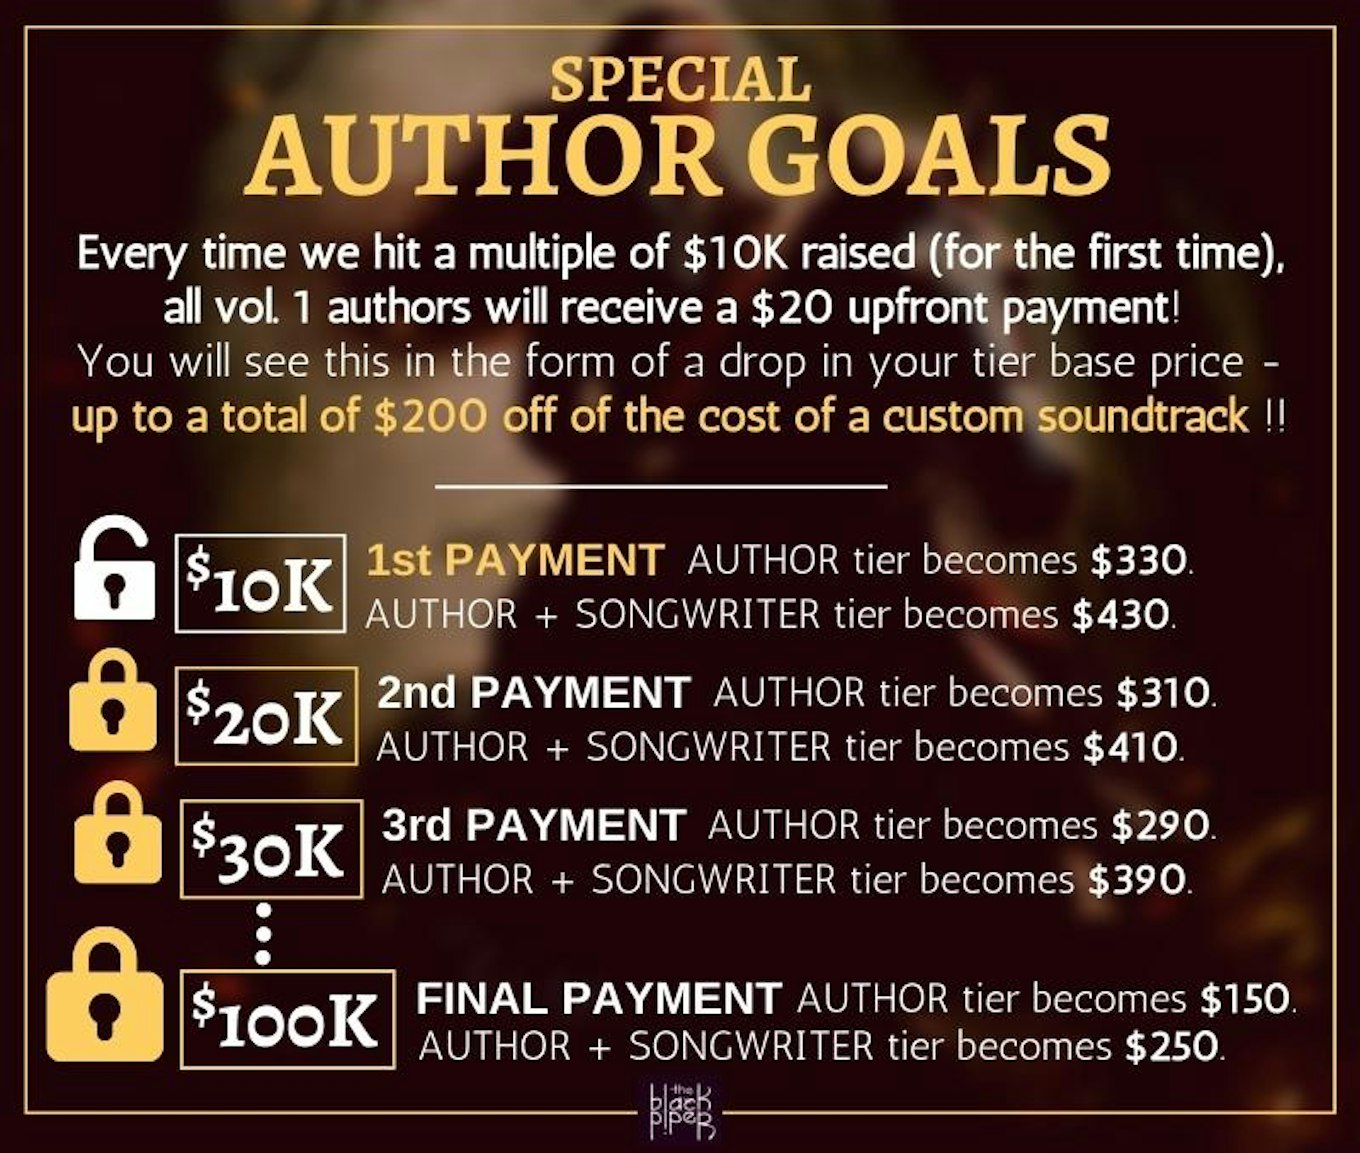 Special Author Goals. Every time we hit a multiple of $10K raised (for the first time), all vol. 1 authors will receive a $20 upfront payment! You will see this in the form of a drop in your tier base price - up to a total of $200 off of the cost of a custom soundtrack!